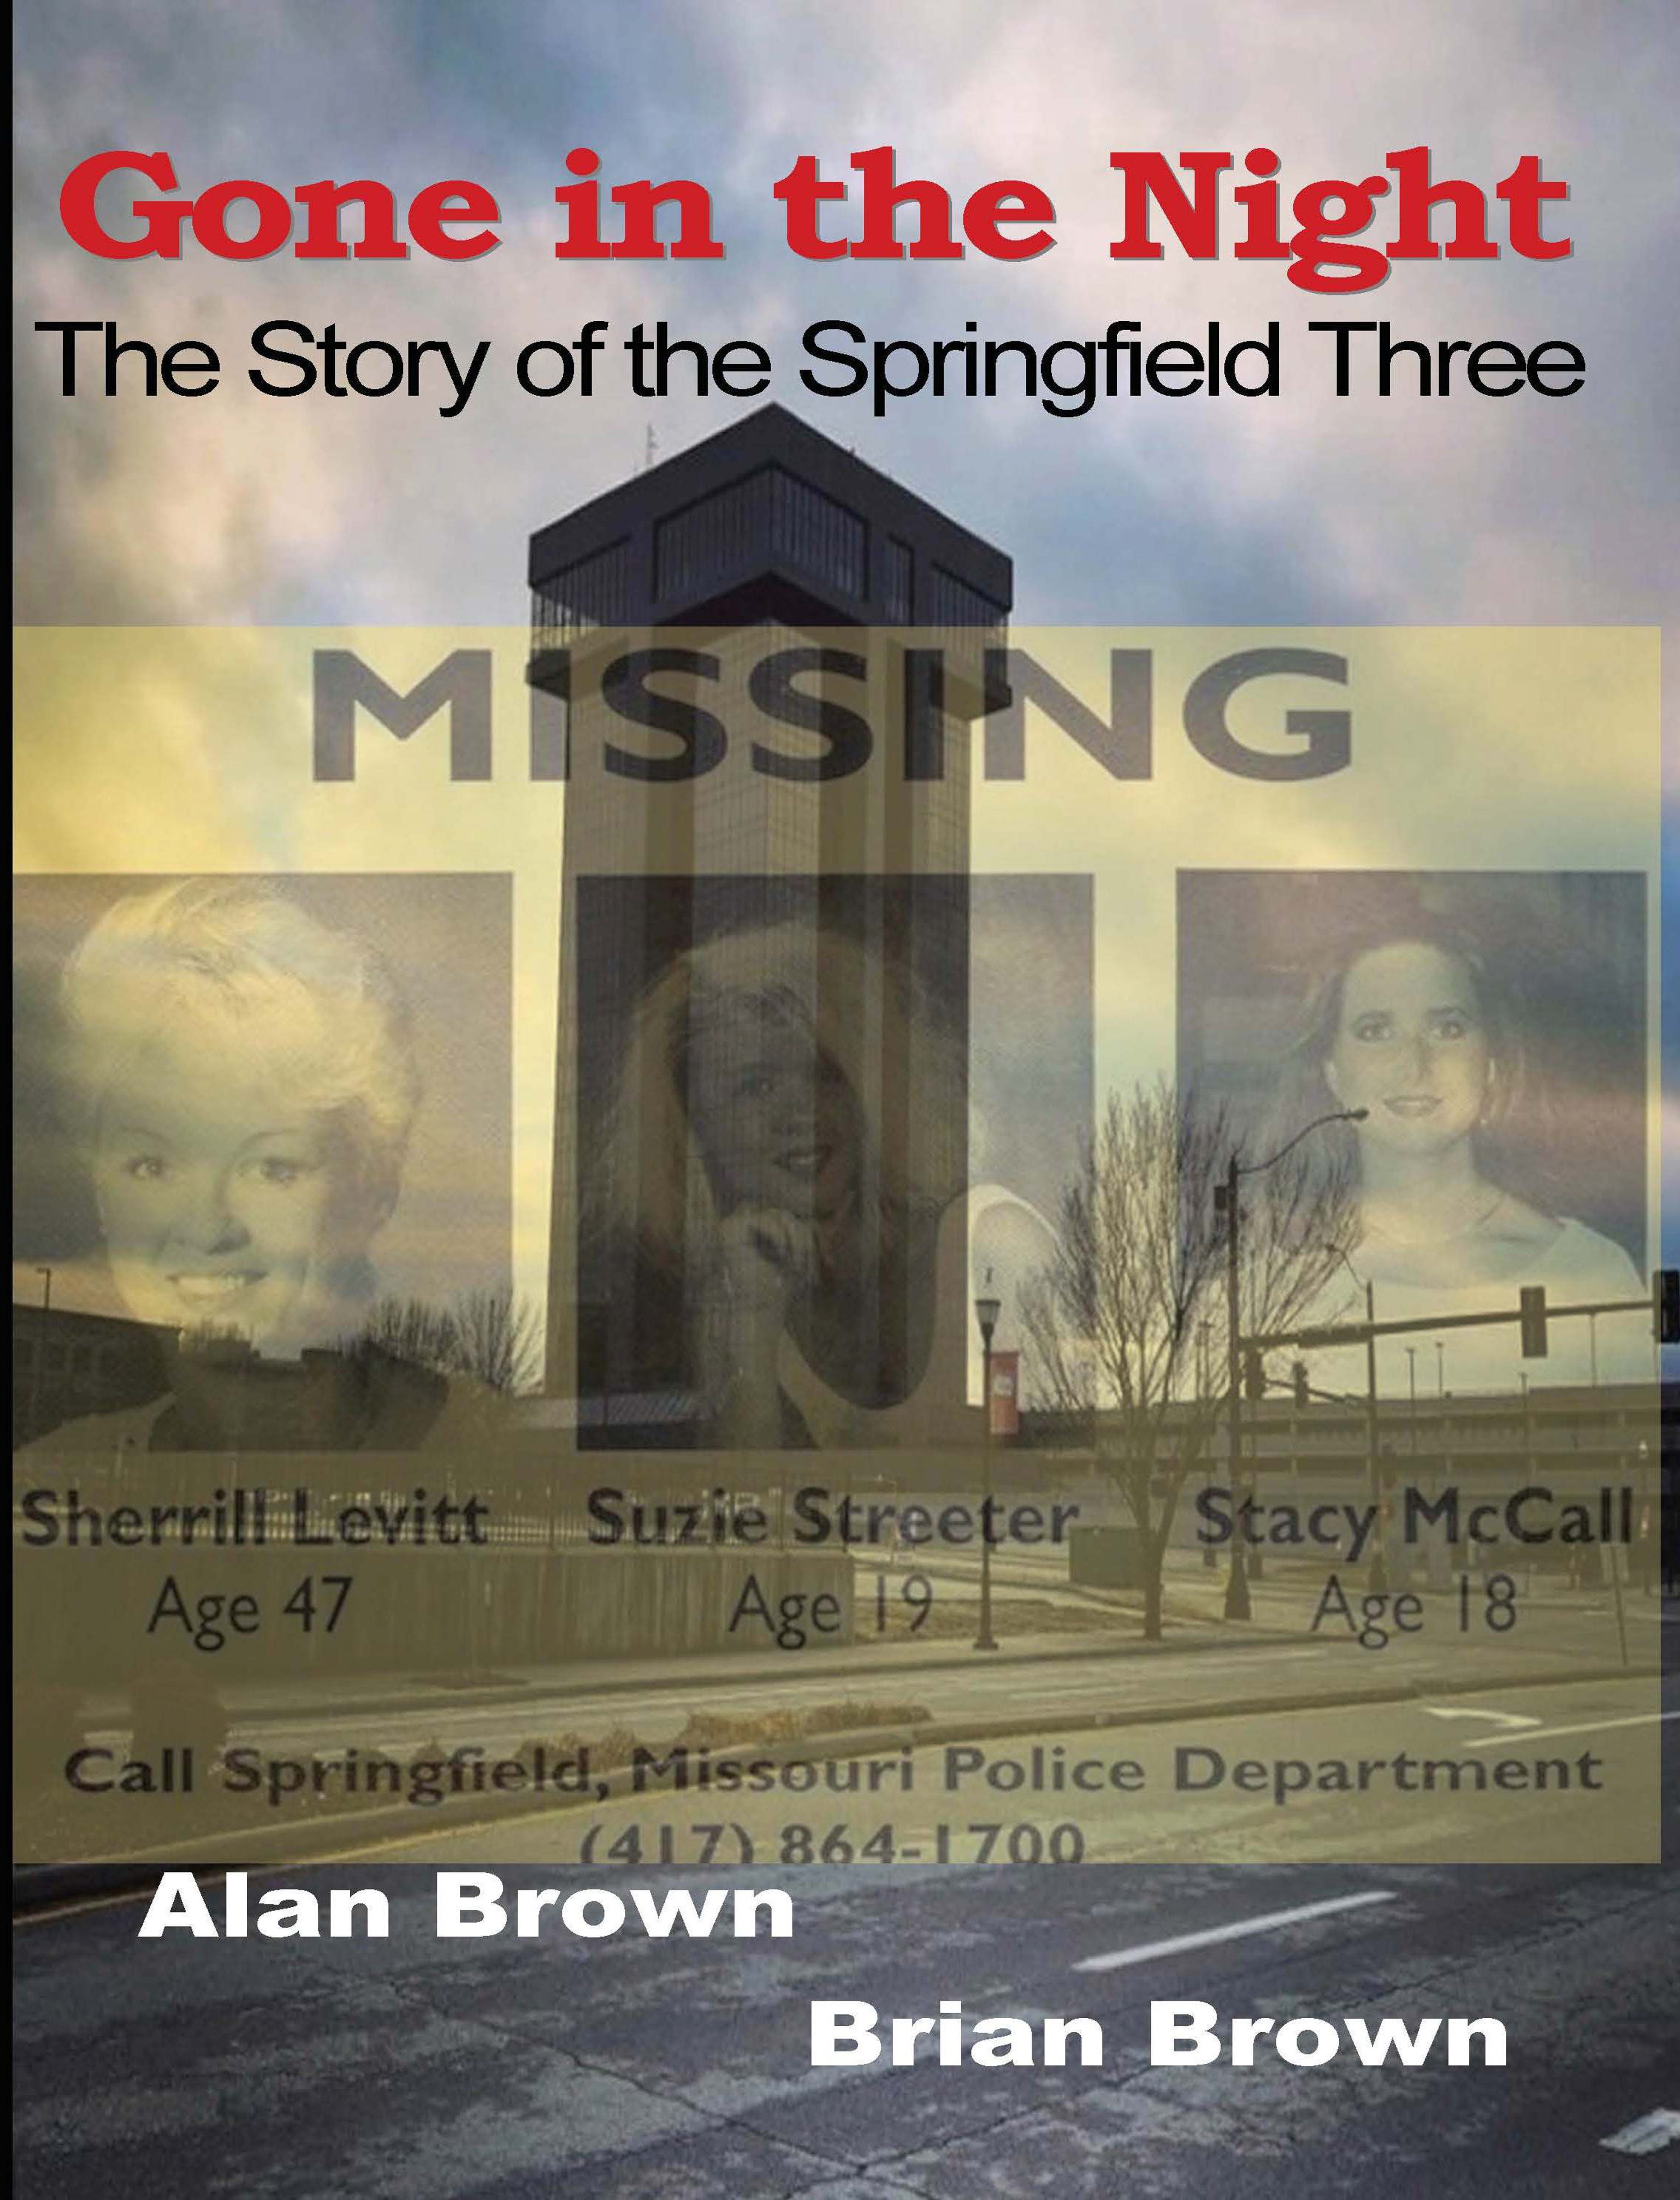 Unsolved case Springfield Three Missing Women inspire new book